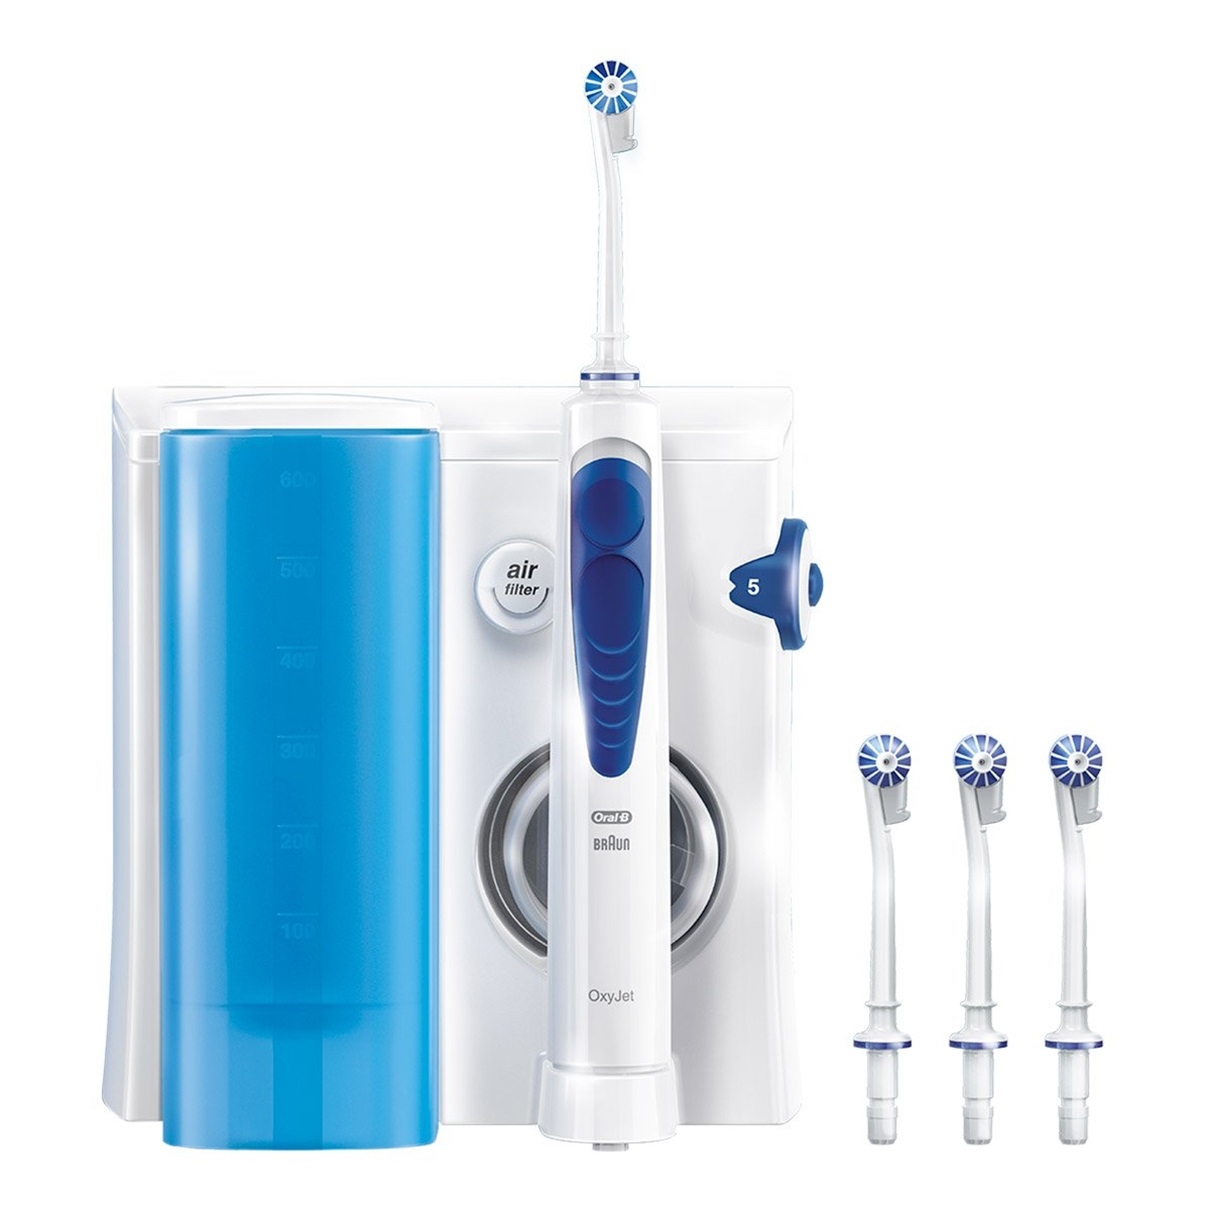 https://static.beautytocare.com/cdn-cgi/image/width=1600,height=1600,f=auto/media/catalog/product//o/r/oral-b-oxyjet-cleaning-system-oral-health-center.jpg